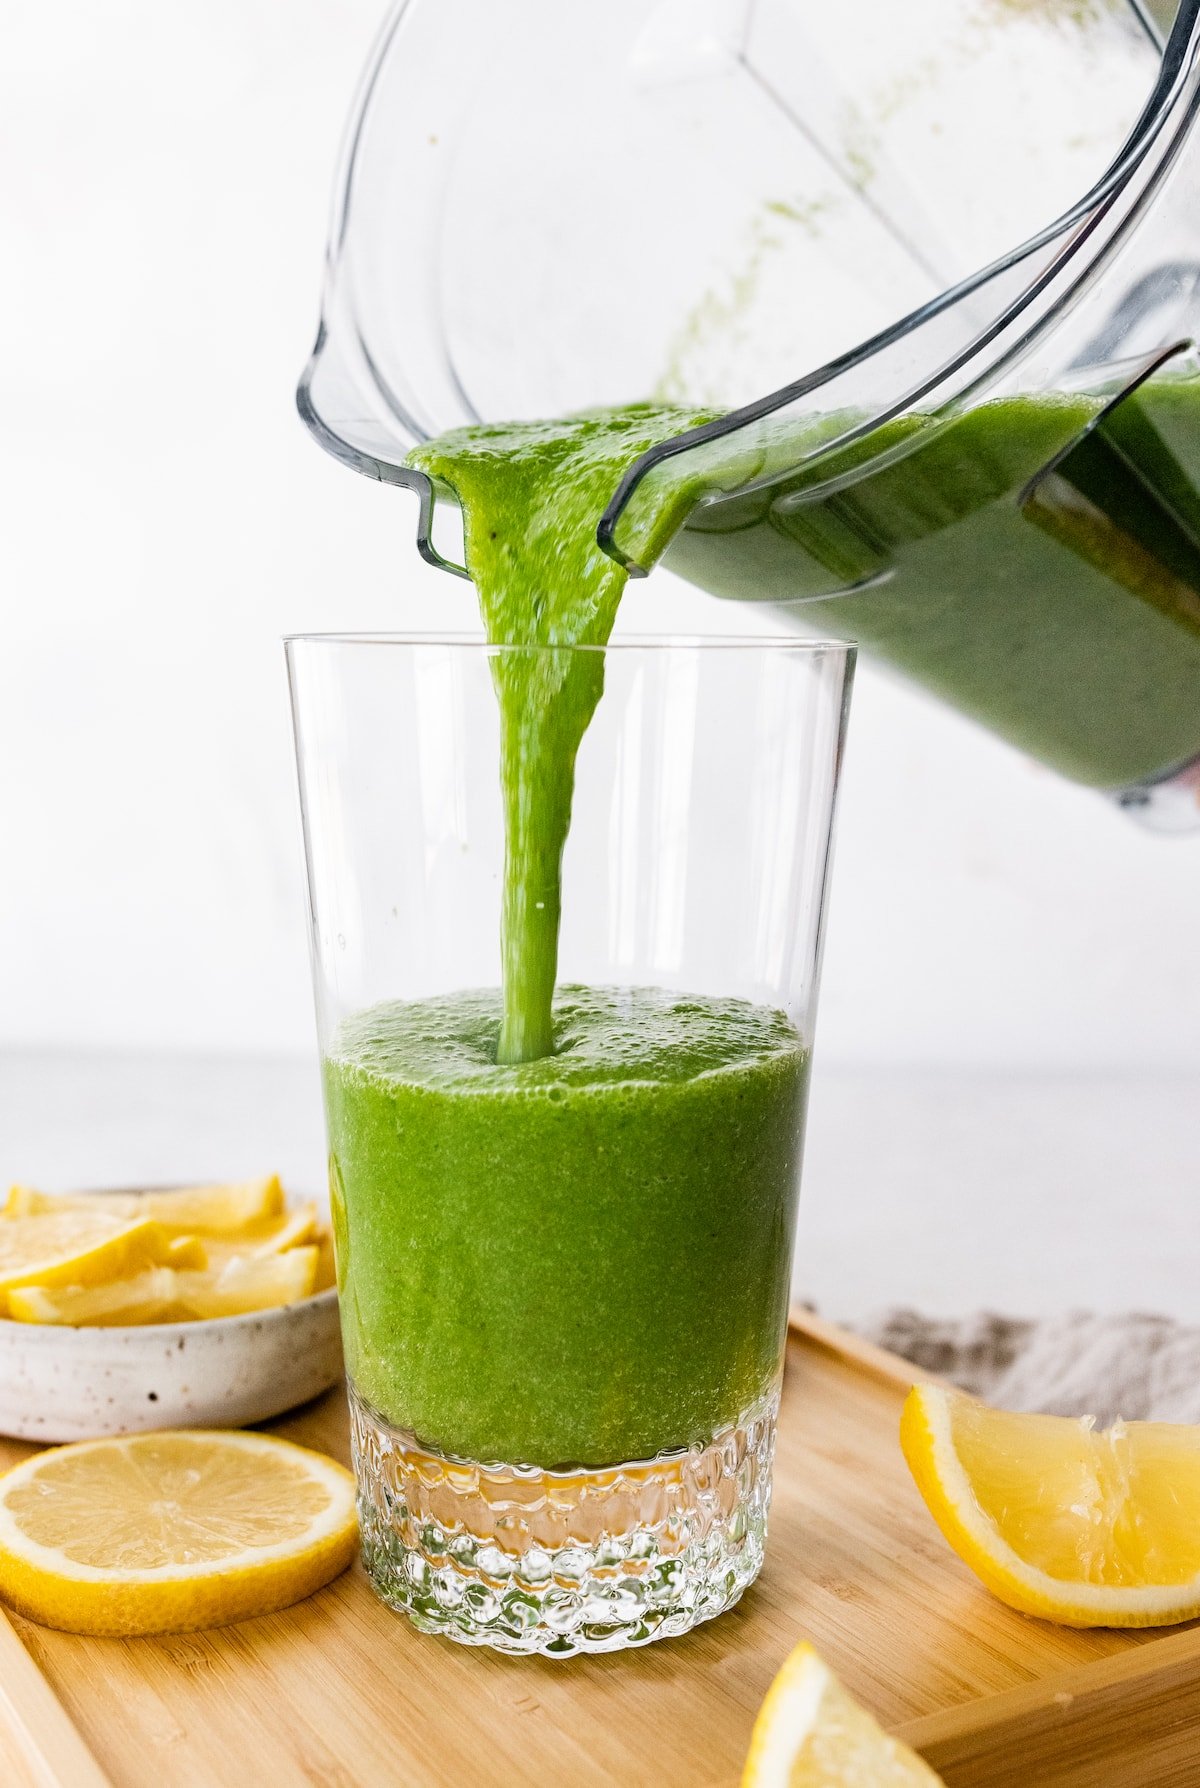 Green lemonade smoothie being poured into a glass.